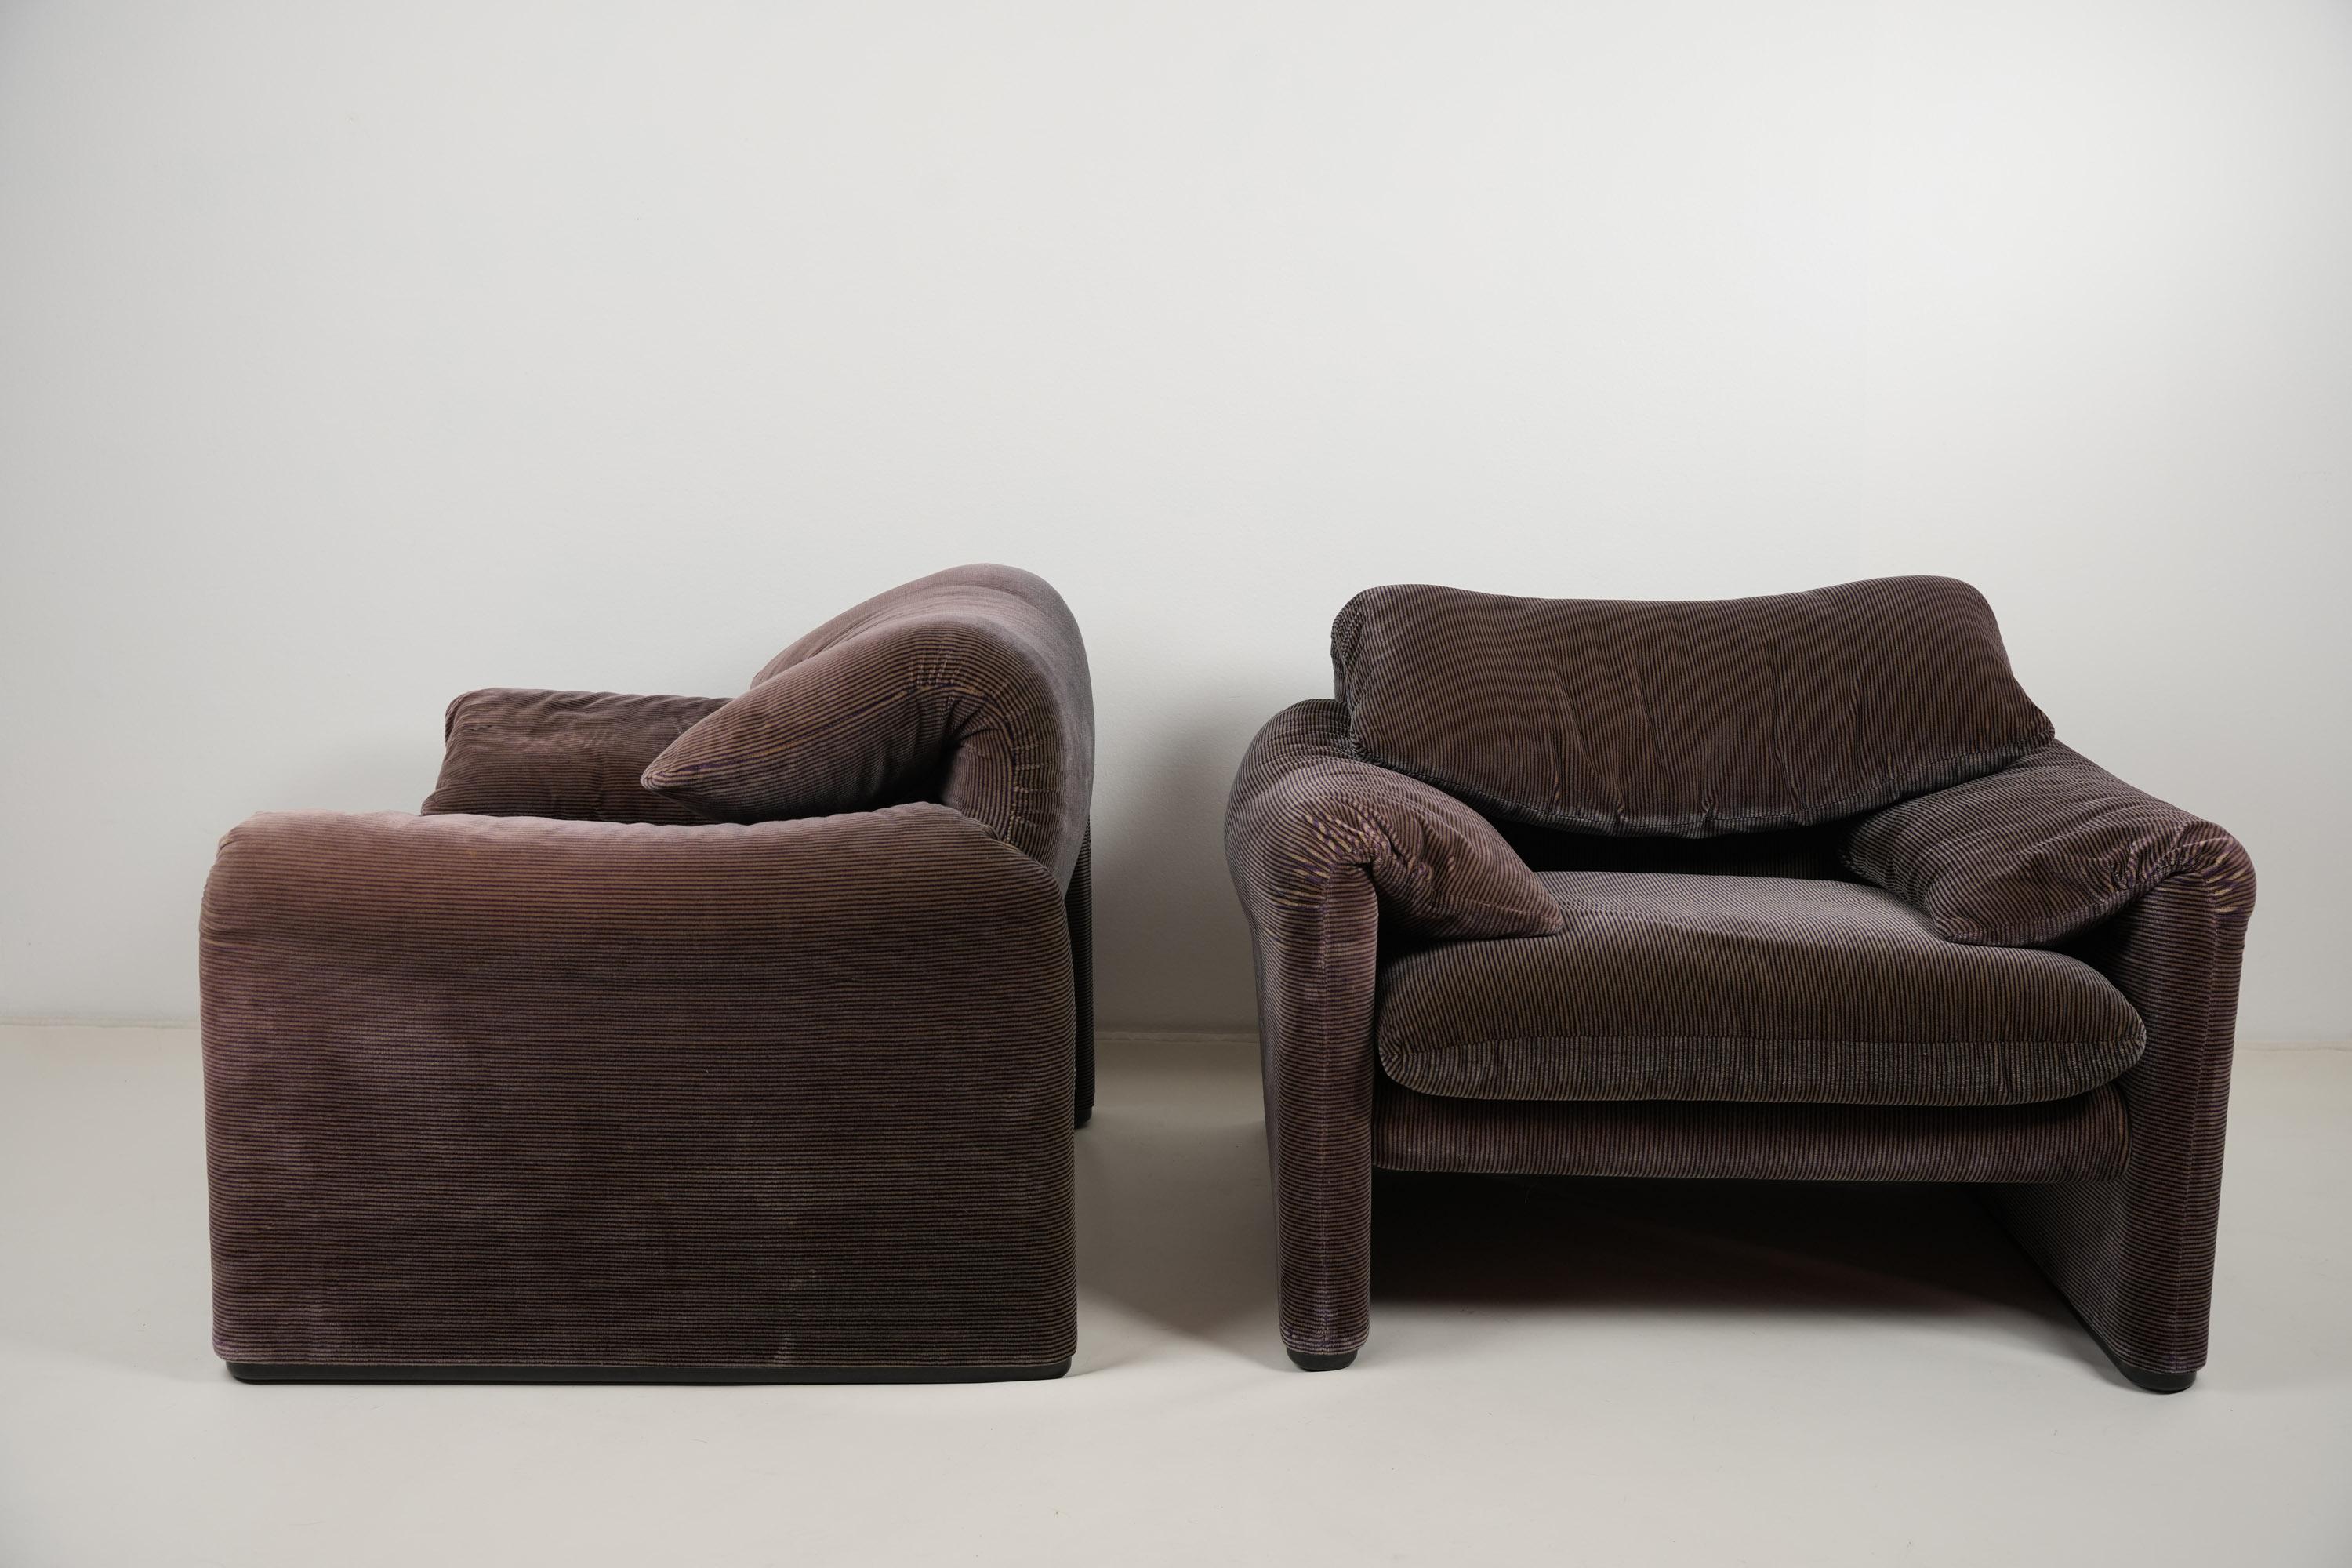 Set of Two Maralunga Longue Chair By Vico Magistretti for Cassina 1970s For Sale 4